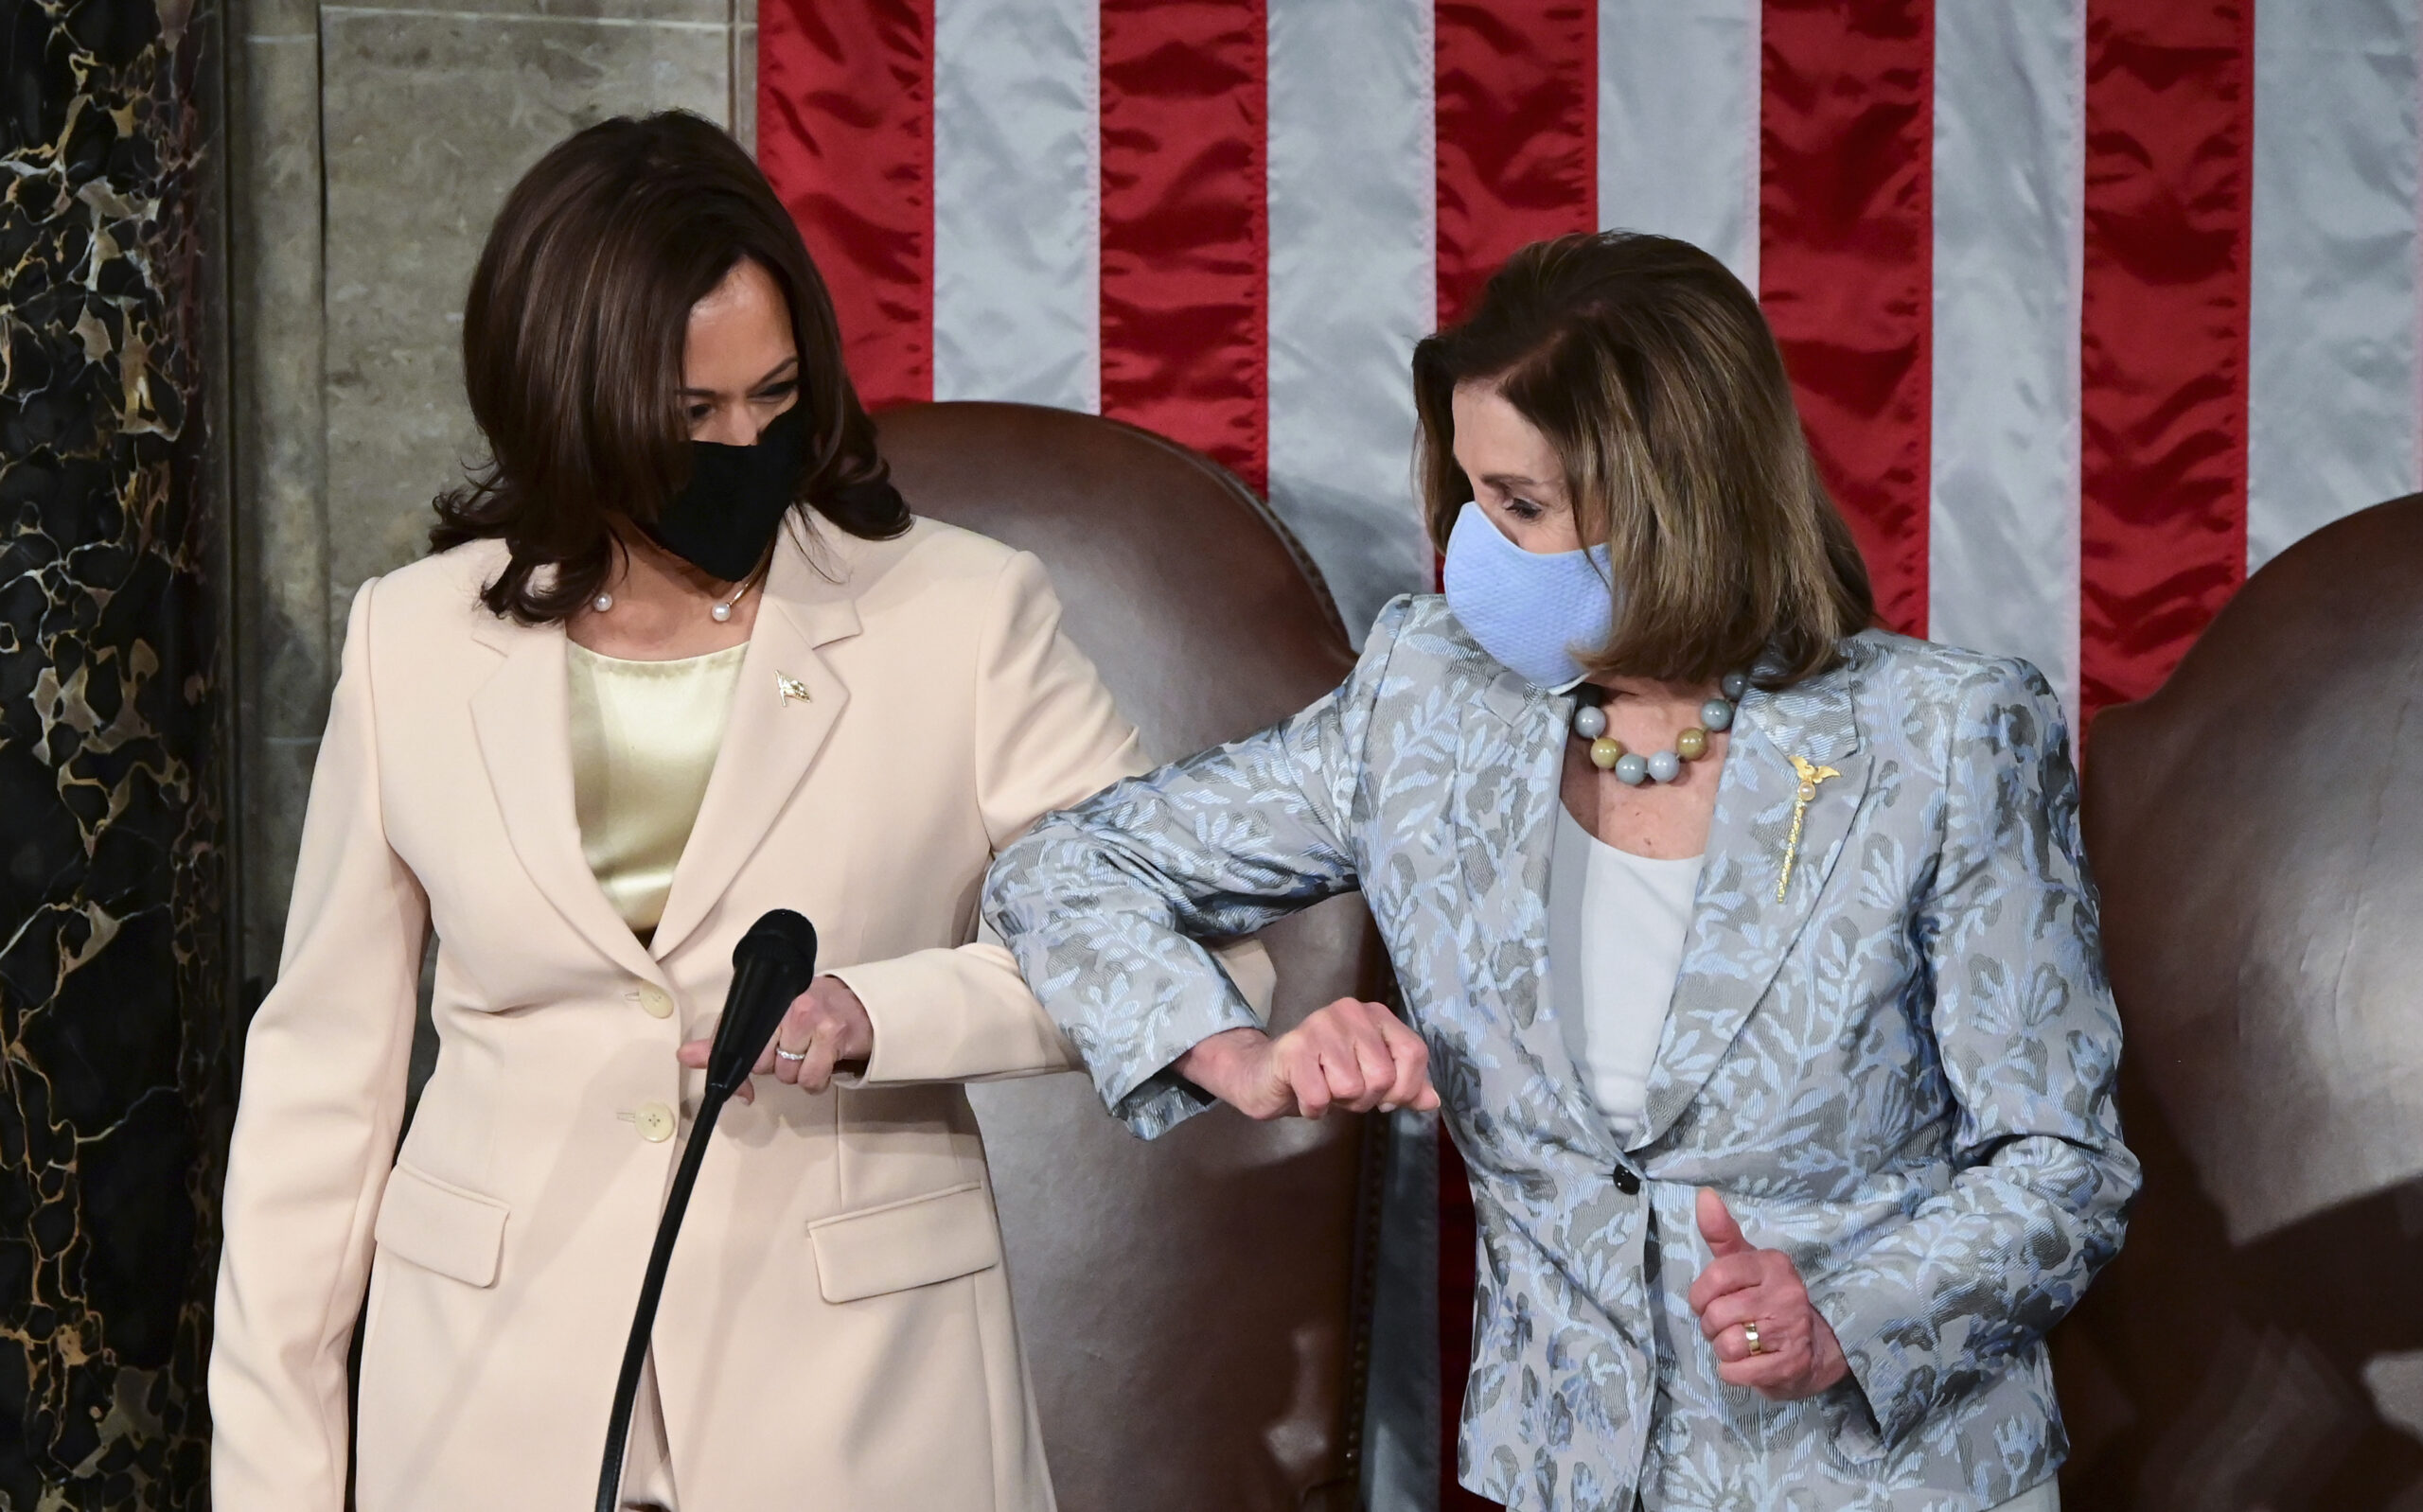 Vice President Kamala Harris, left, greets House Speaker Nancy Pelosi of Calif., ahead of President Joe Biden addressing a joint session of Congress, Wednesday, April 28, 2021, in the House Chamber at the U.S. Capitol in Washington. (Jim Watson/Pool via AP)